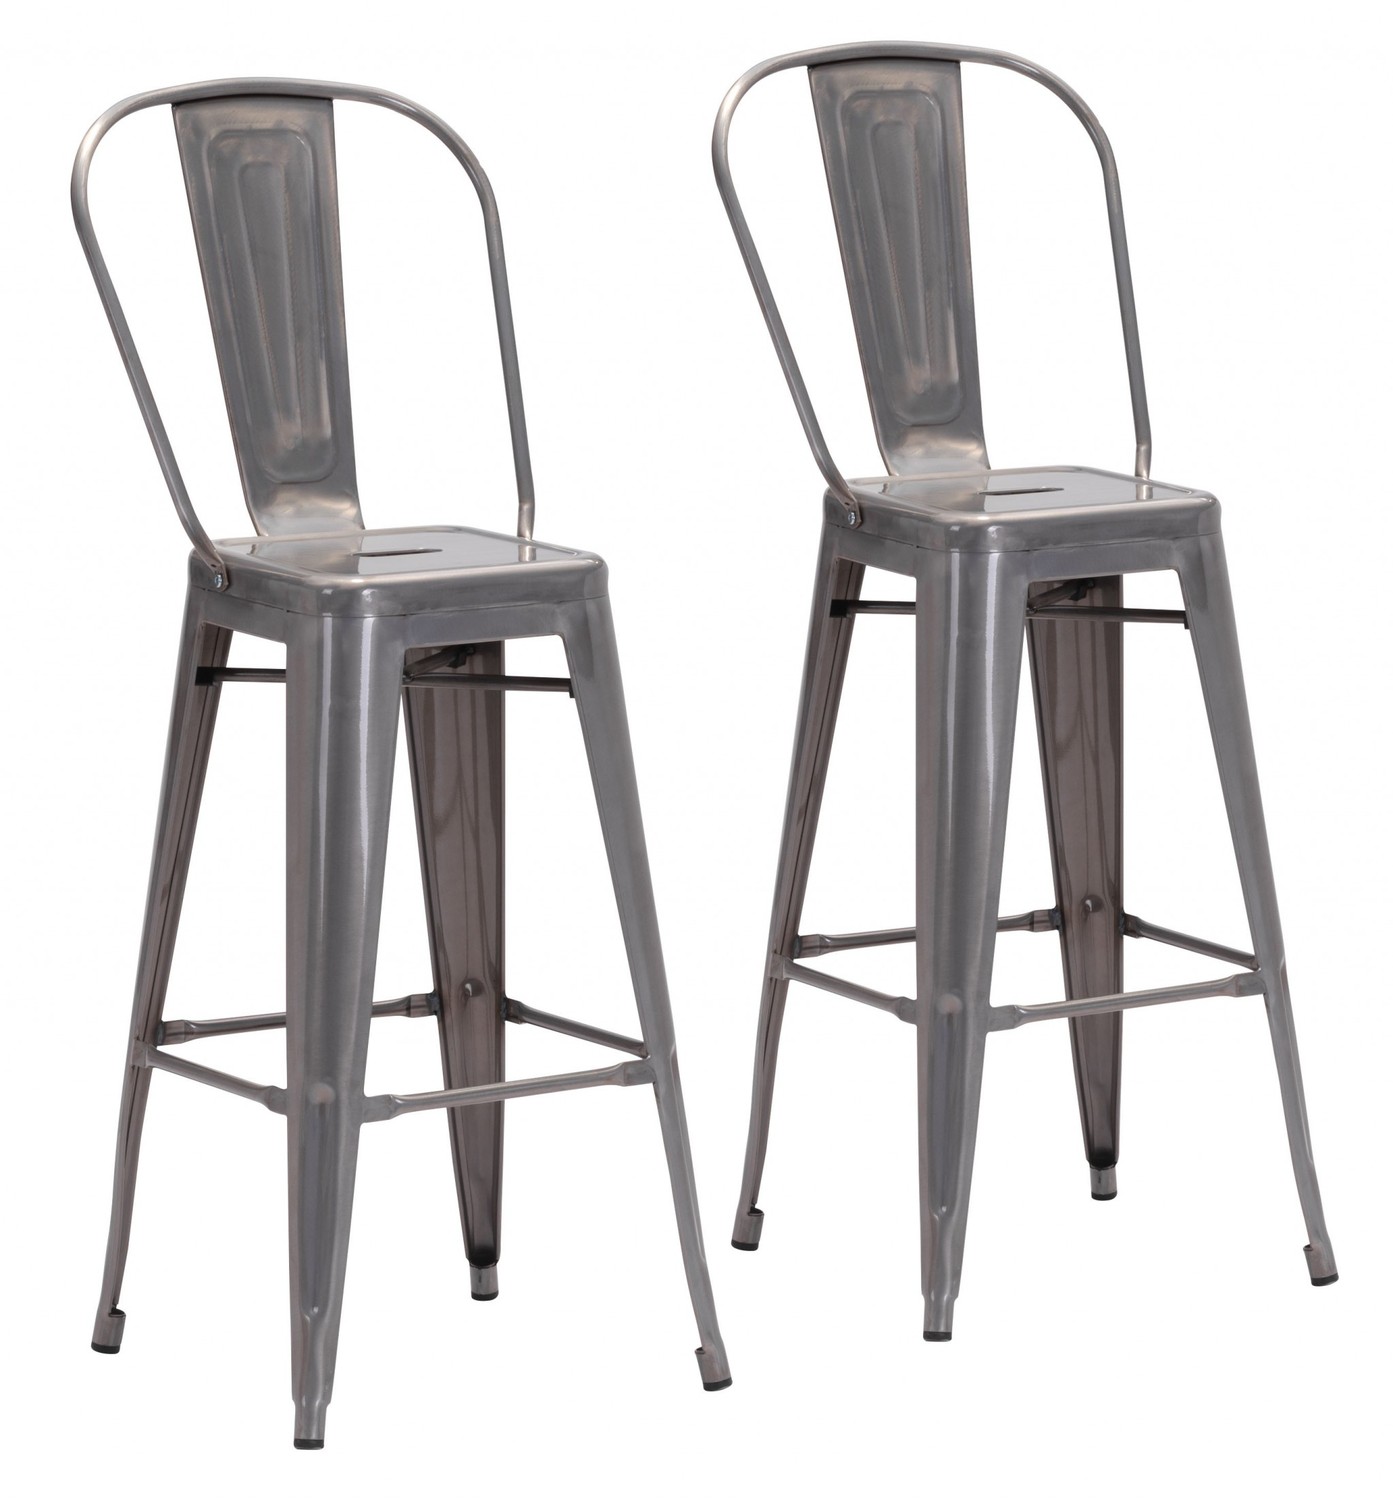 Set of Two Gray Steel Bar Chairs